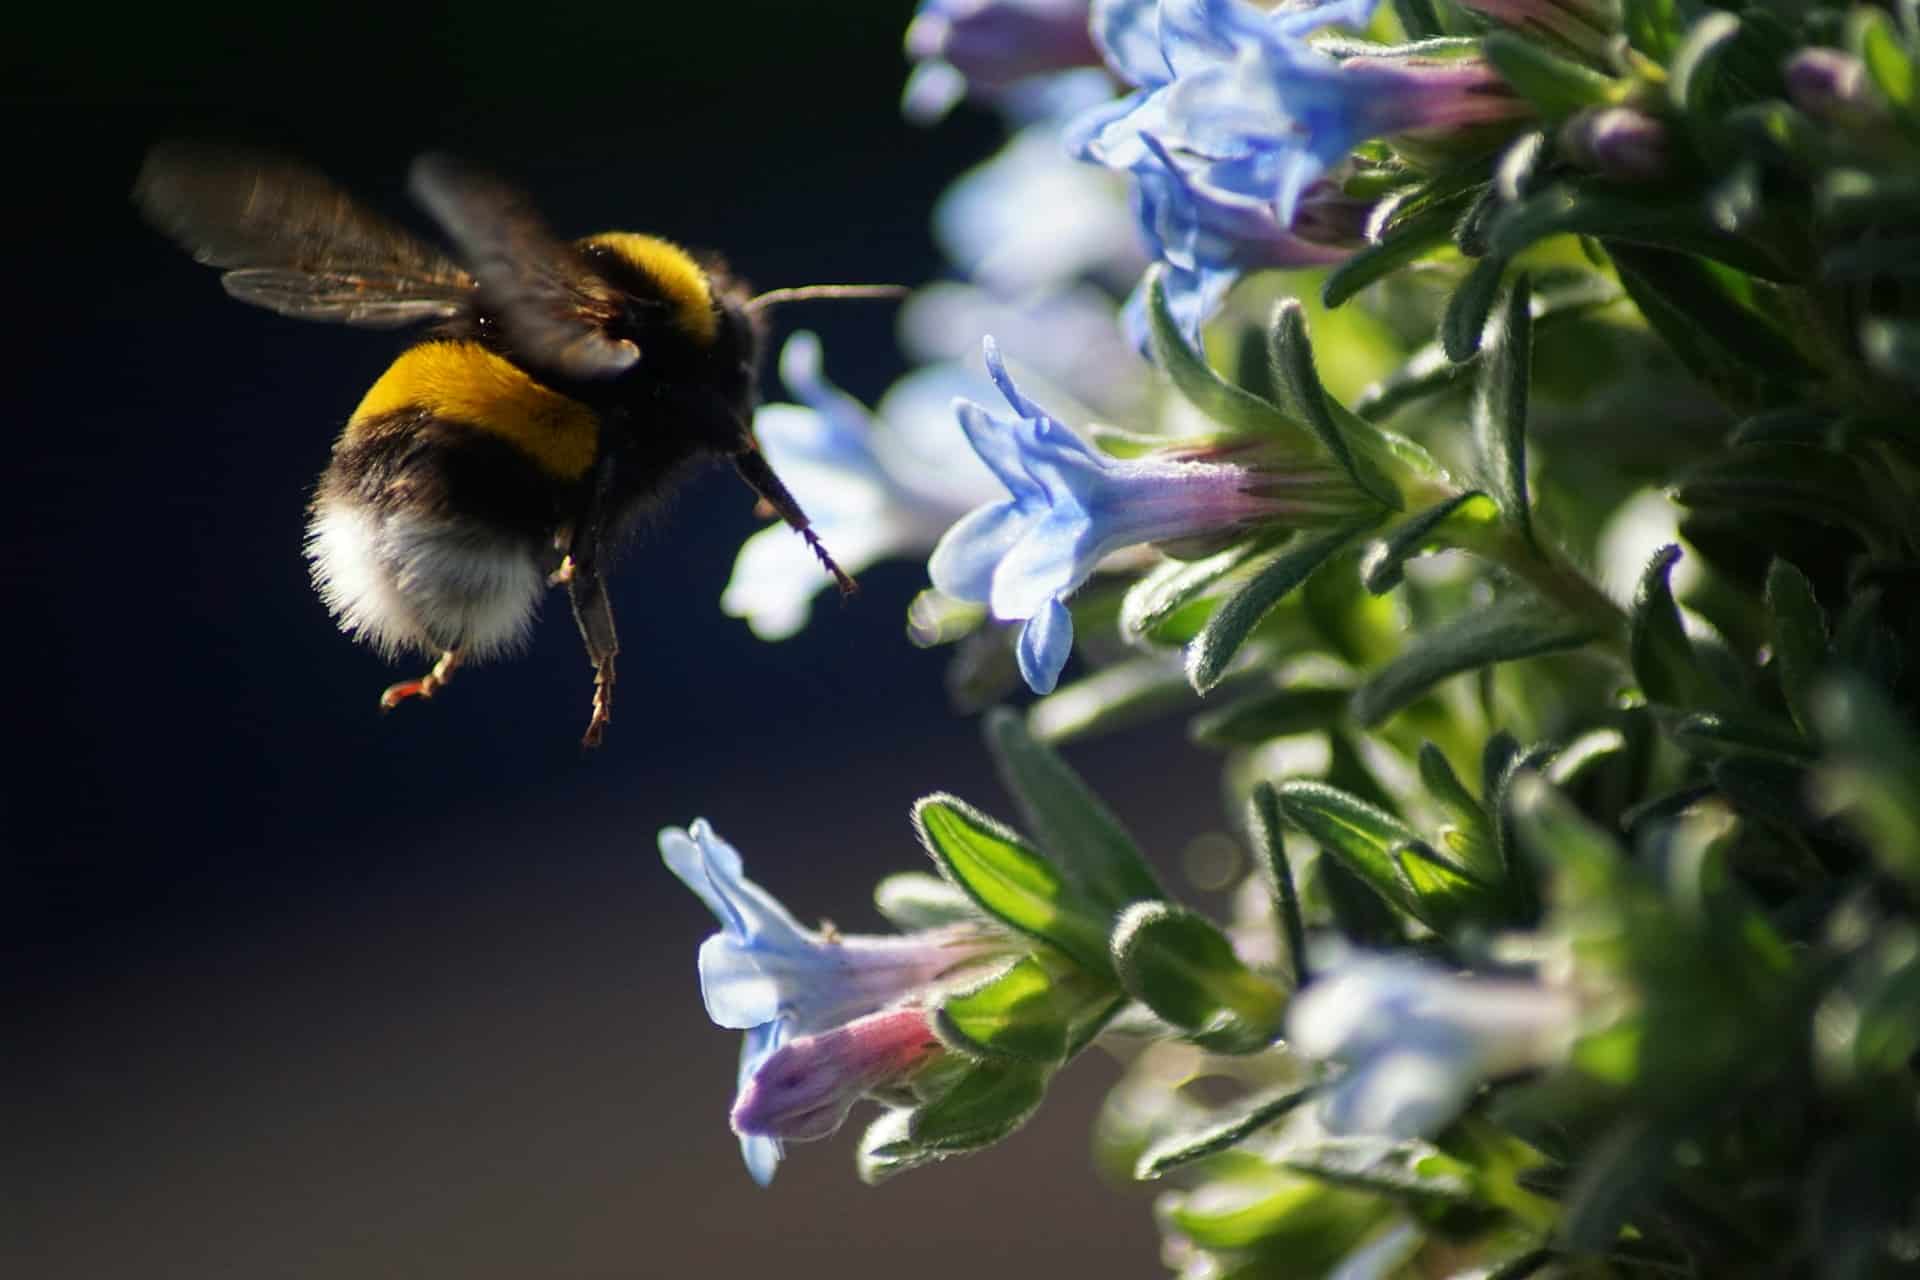 Bumblebees possess an amazing form of collective intelligence that was once thought to be specific to humans